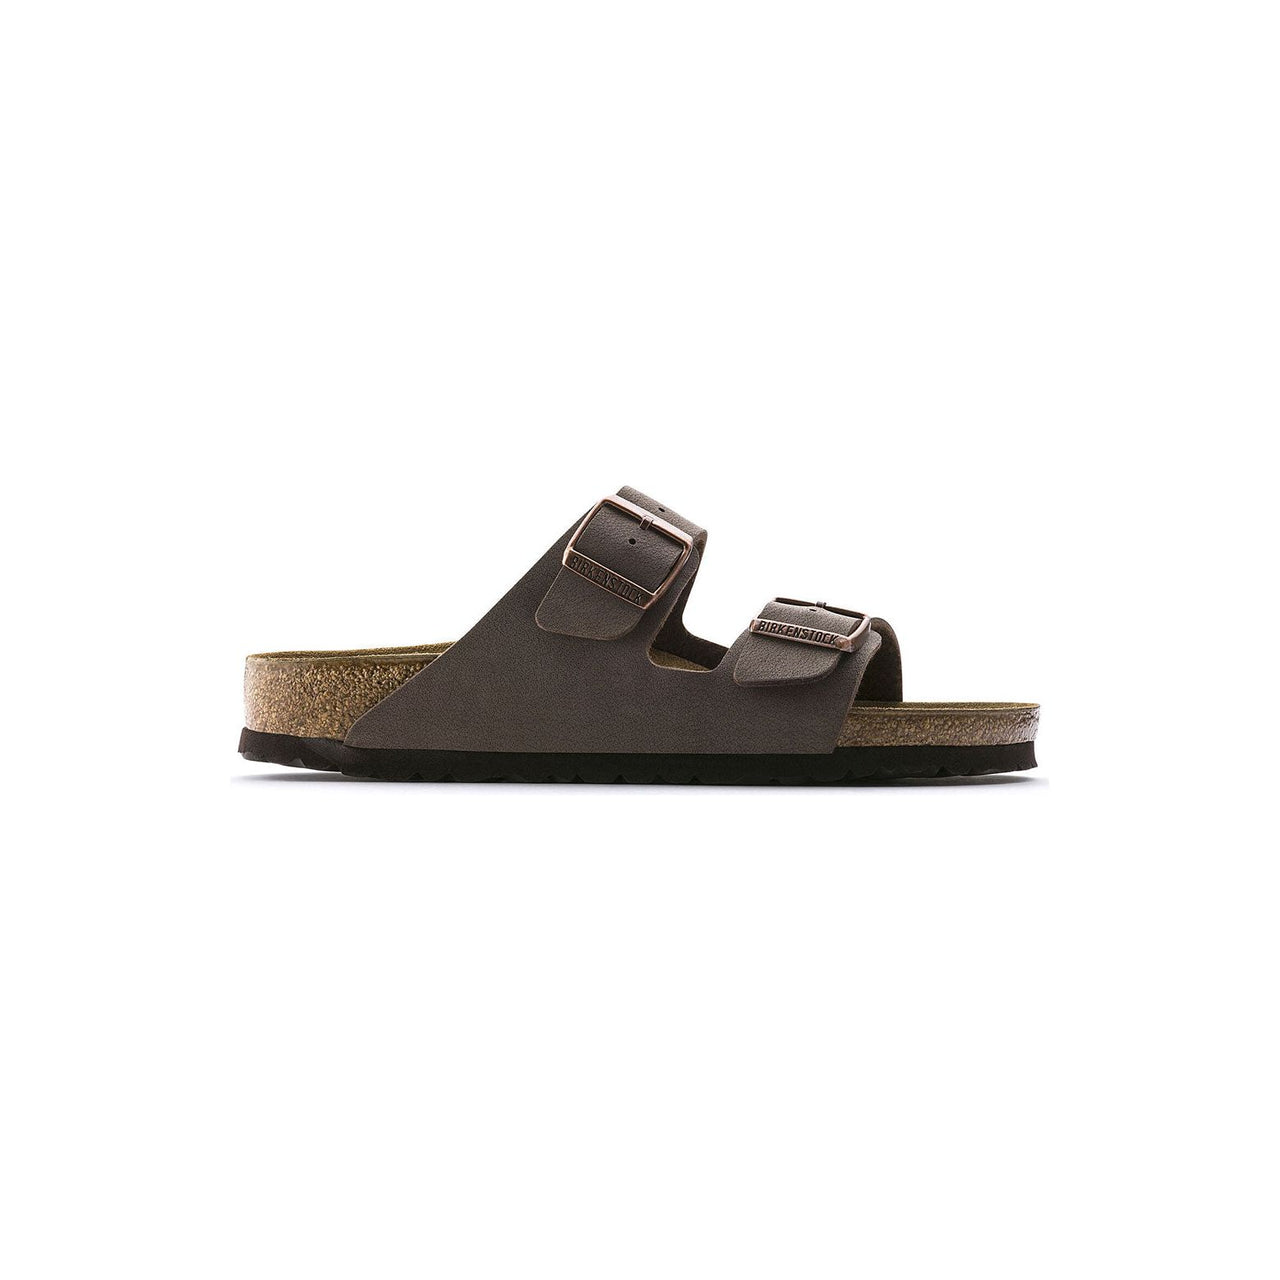 A pair of (0151181) Arizona Sandals in Mocha color, perfect for all-day comfort and style